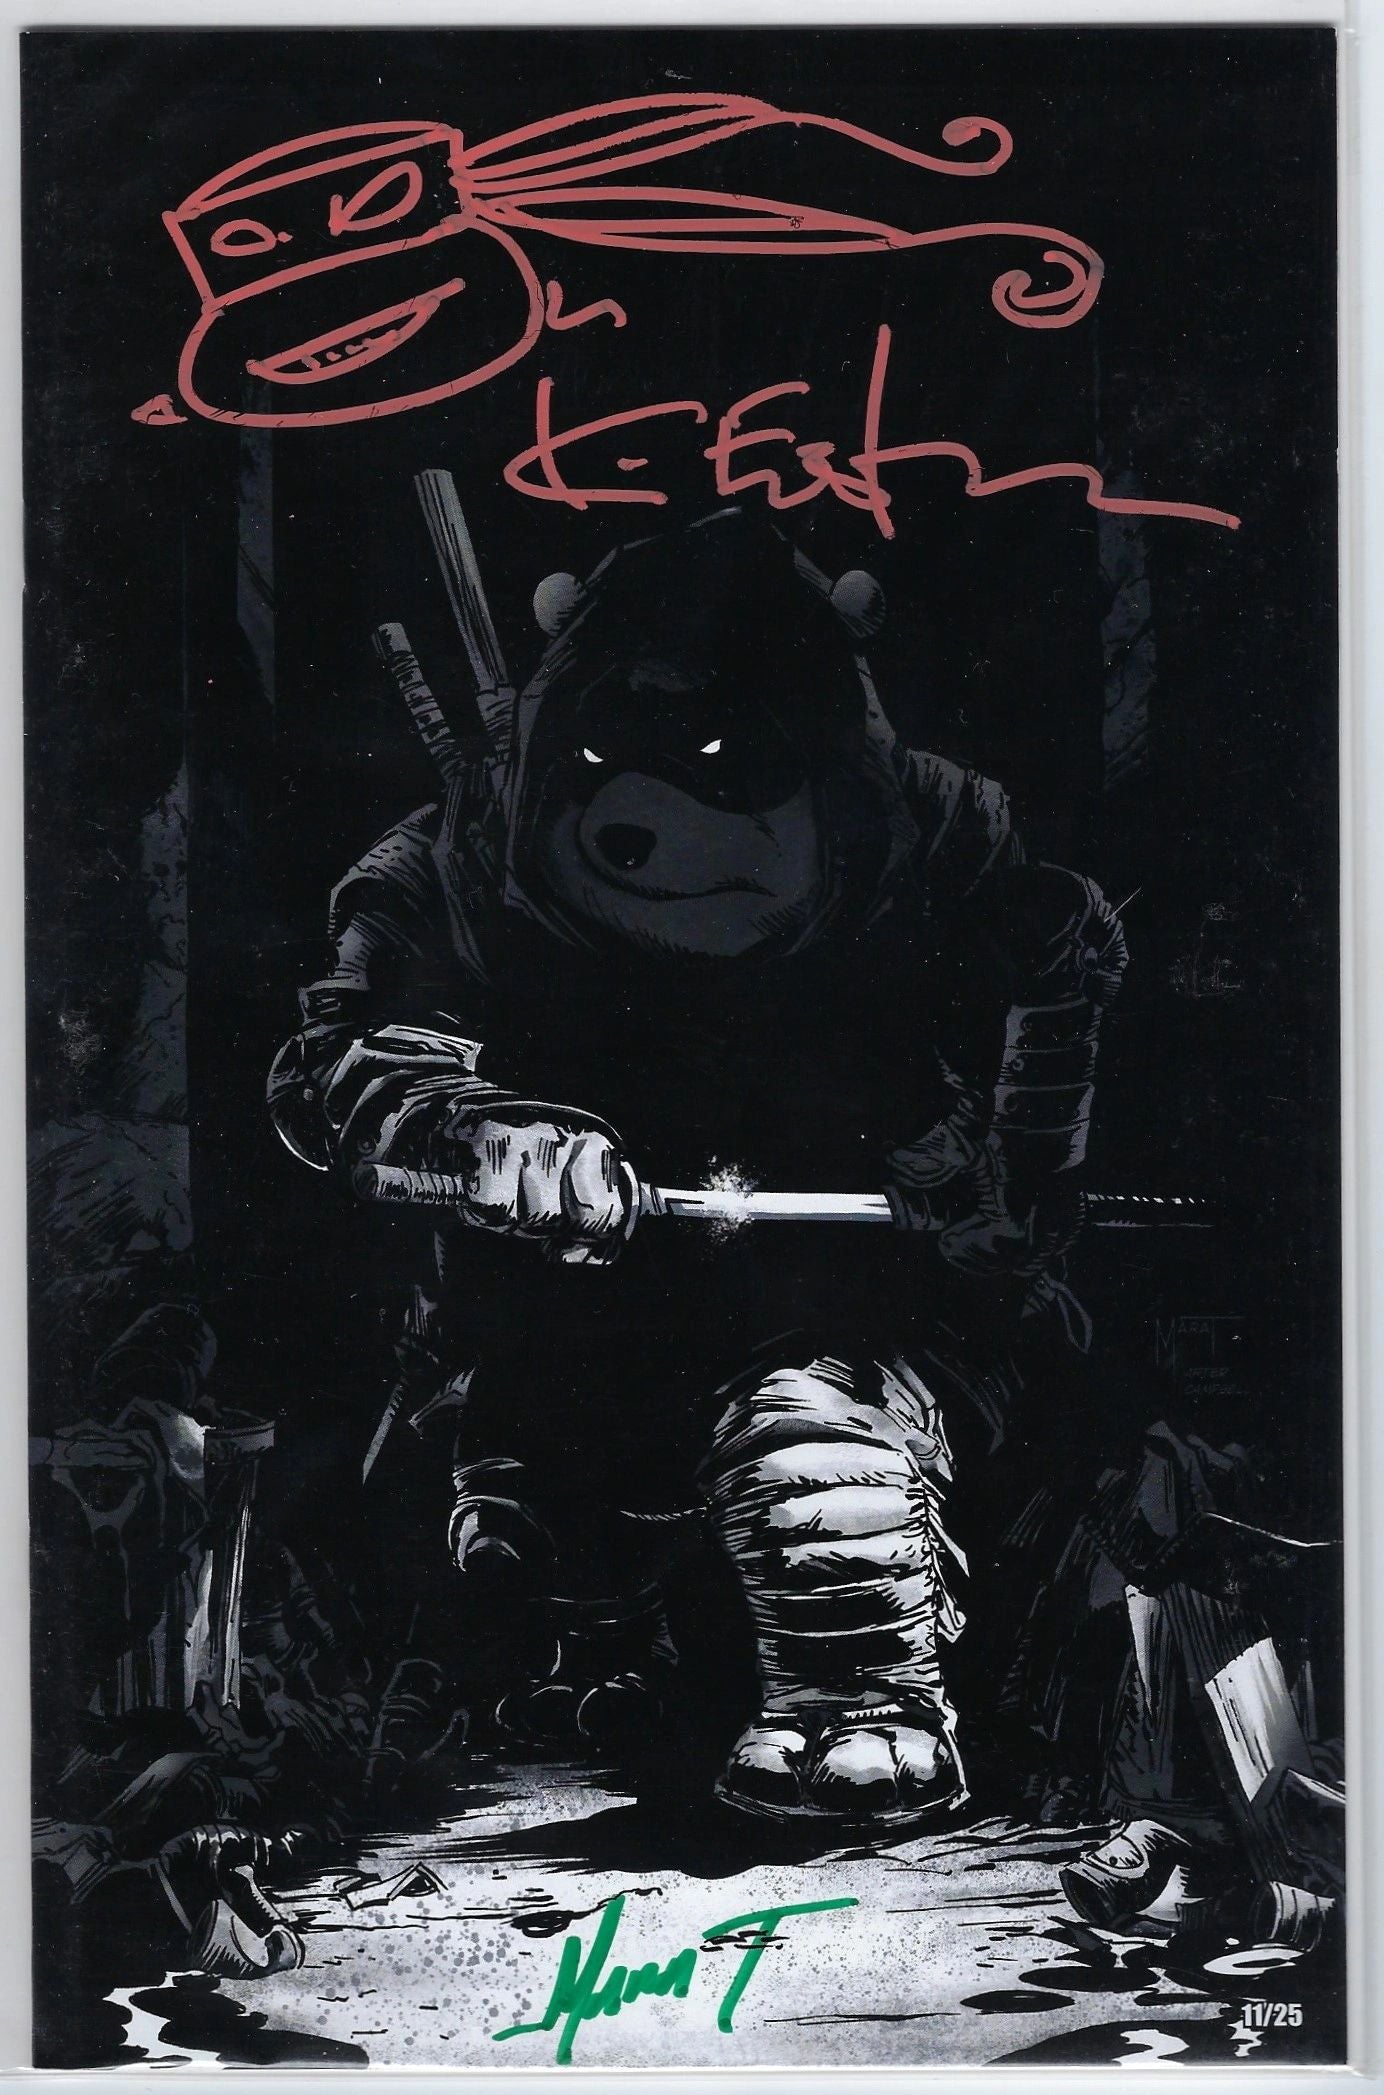 Do You Pooh TMNT The Last Ronin #2 VIRGIN COVER Sophie Campbell Homage SIGNED by Marat Mychaels & KEVIN EASTMAN /25 W/JSA COA